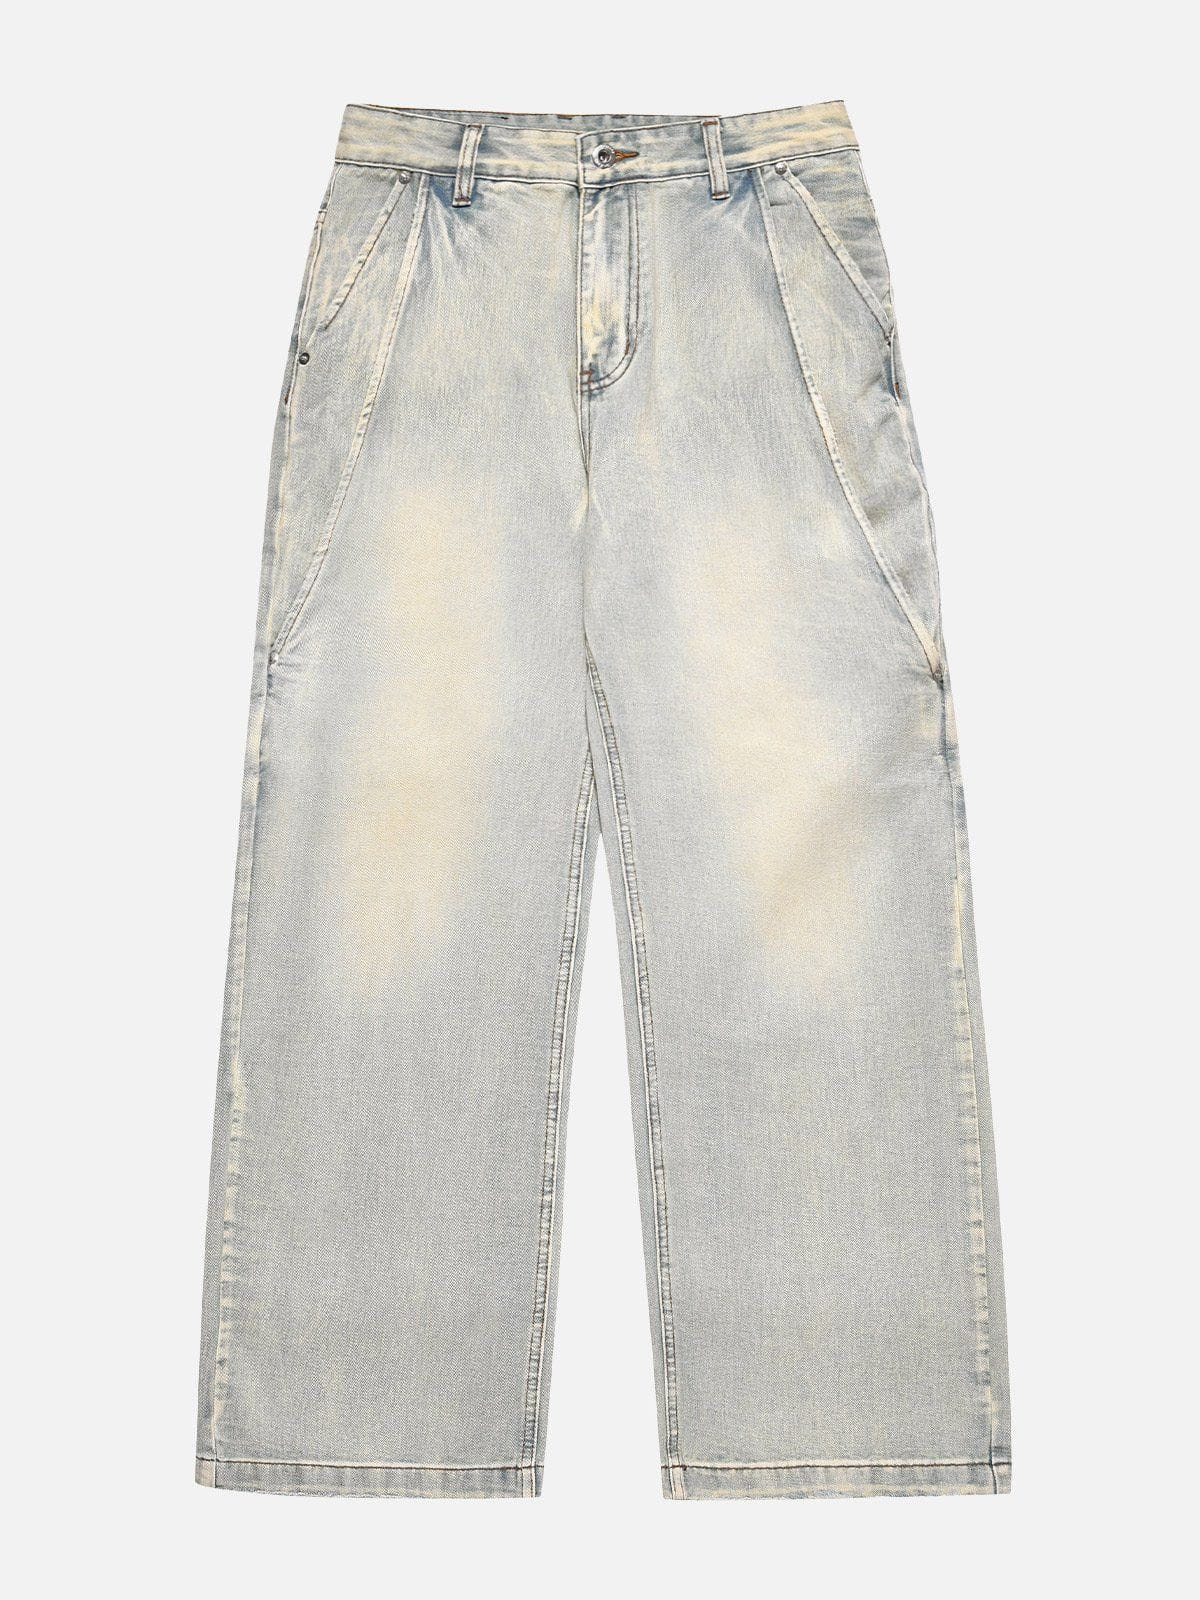 Aelfric Eden Washed Loose Jeans